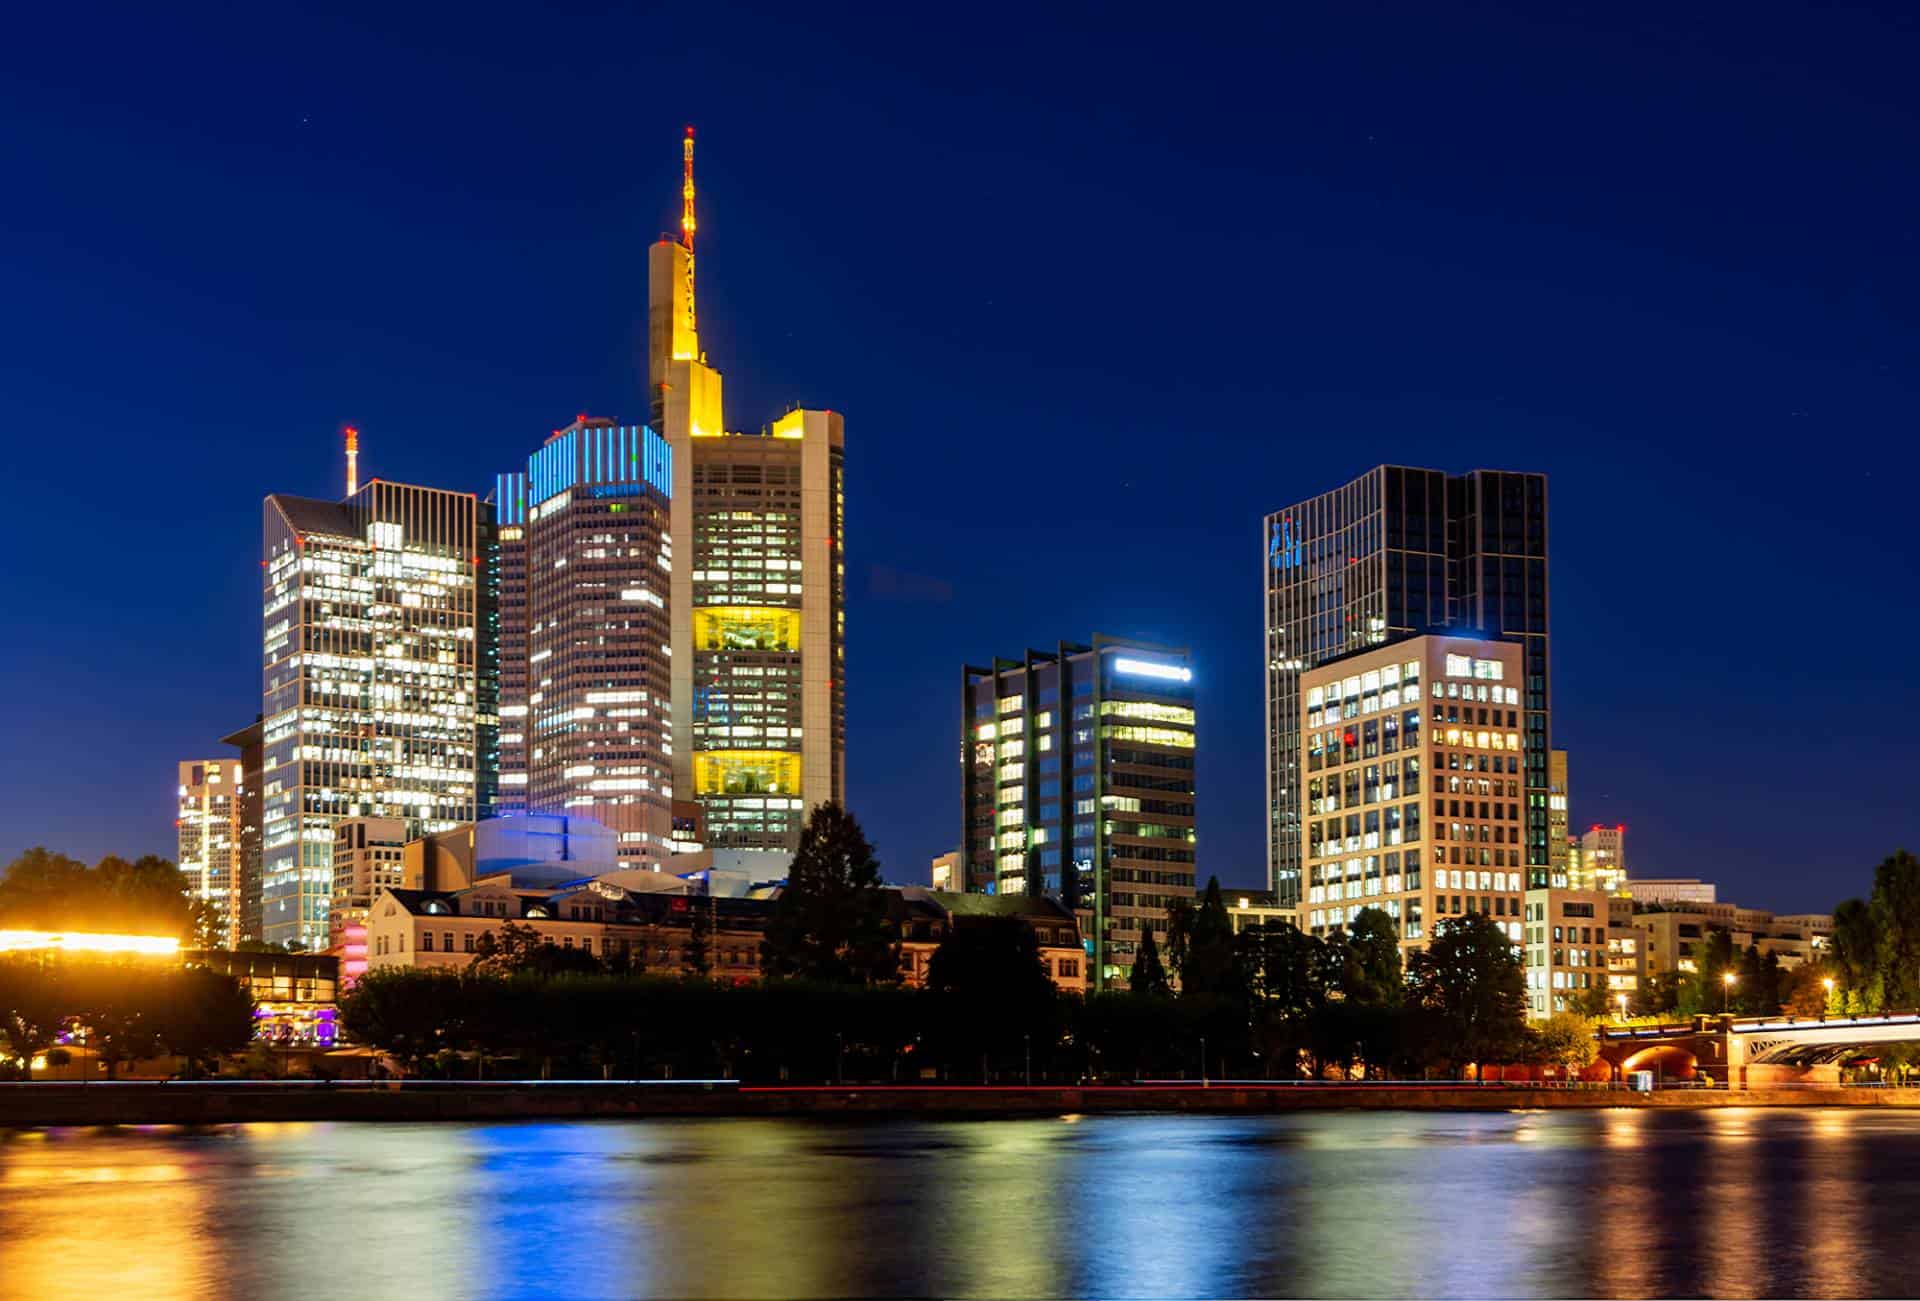 Night view of Frankfurt's skyline from the Main River with the Commerzbank Tower illuminated in yellow lights.